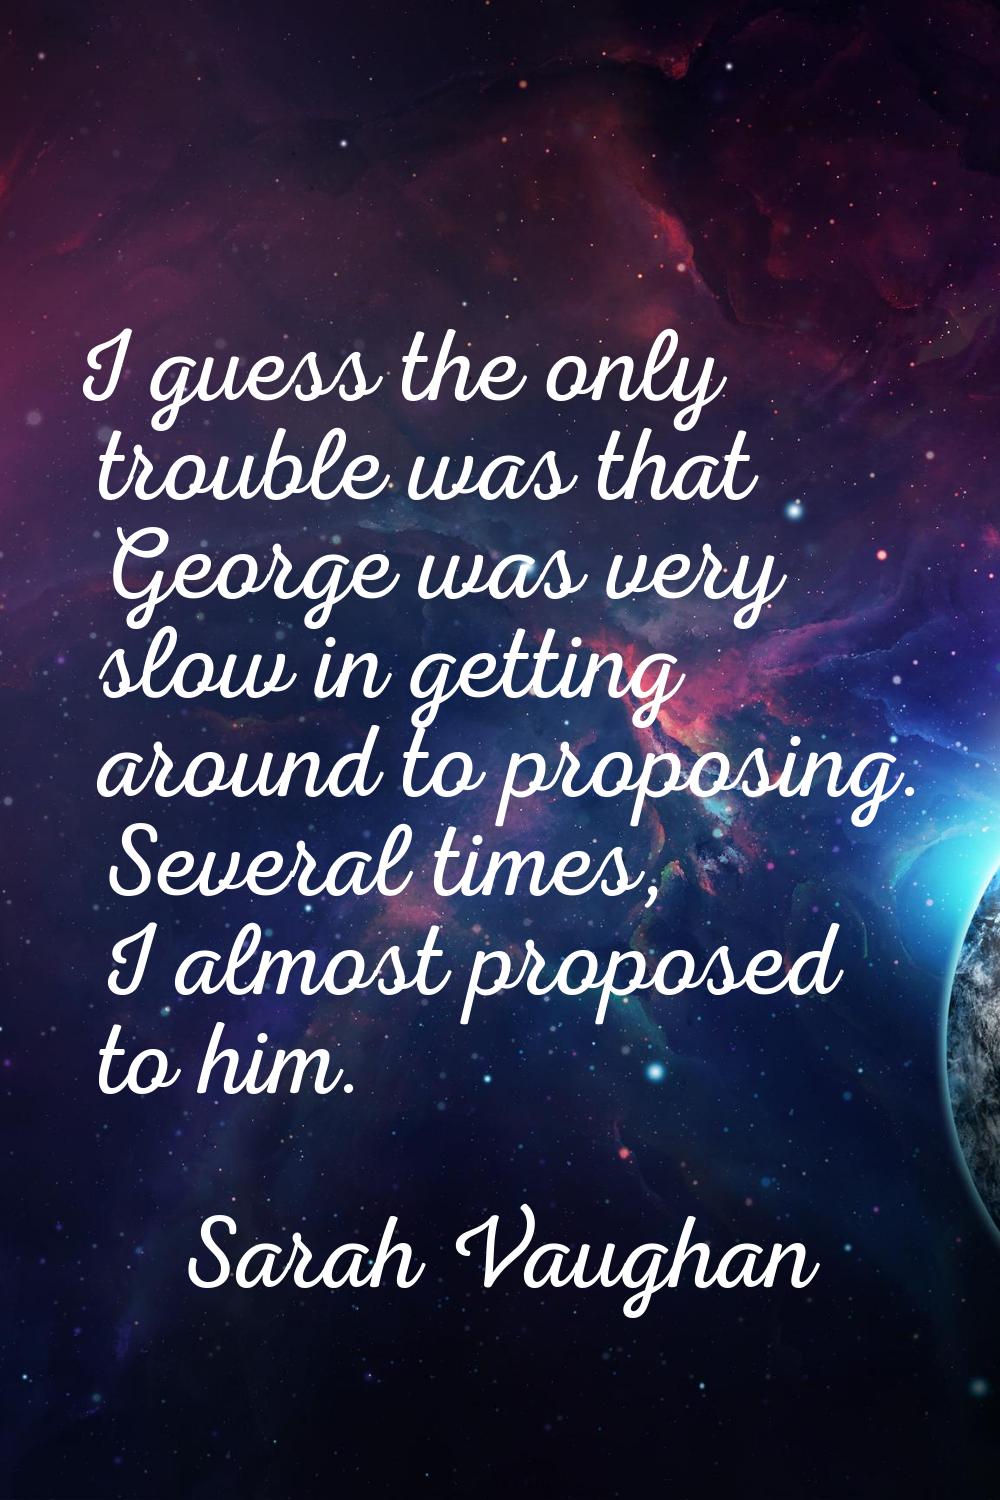 I guess the only trouble was that George was very slow in getting around to proposing. Several time